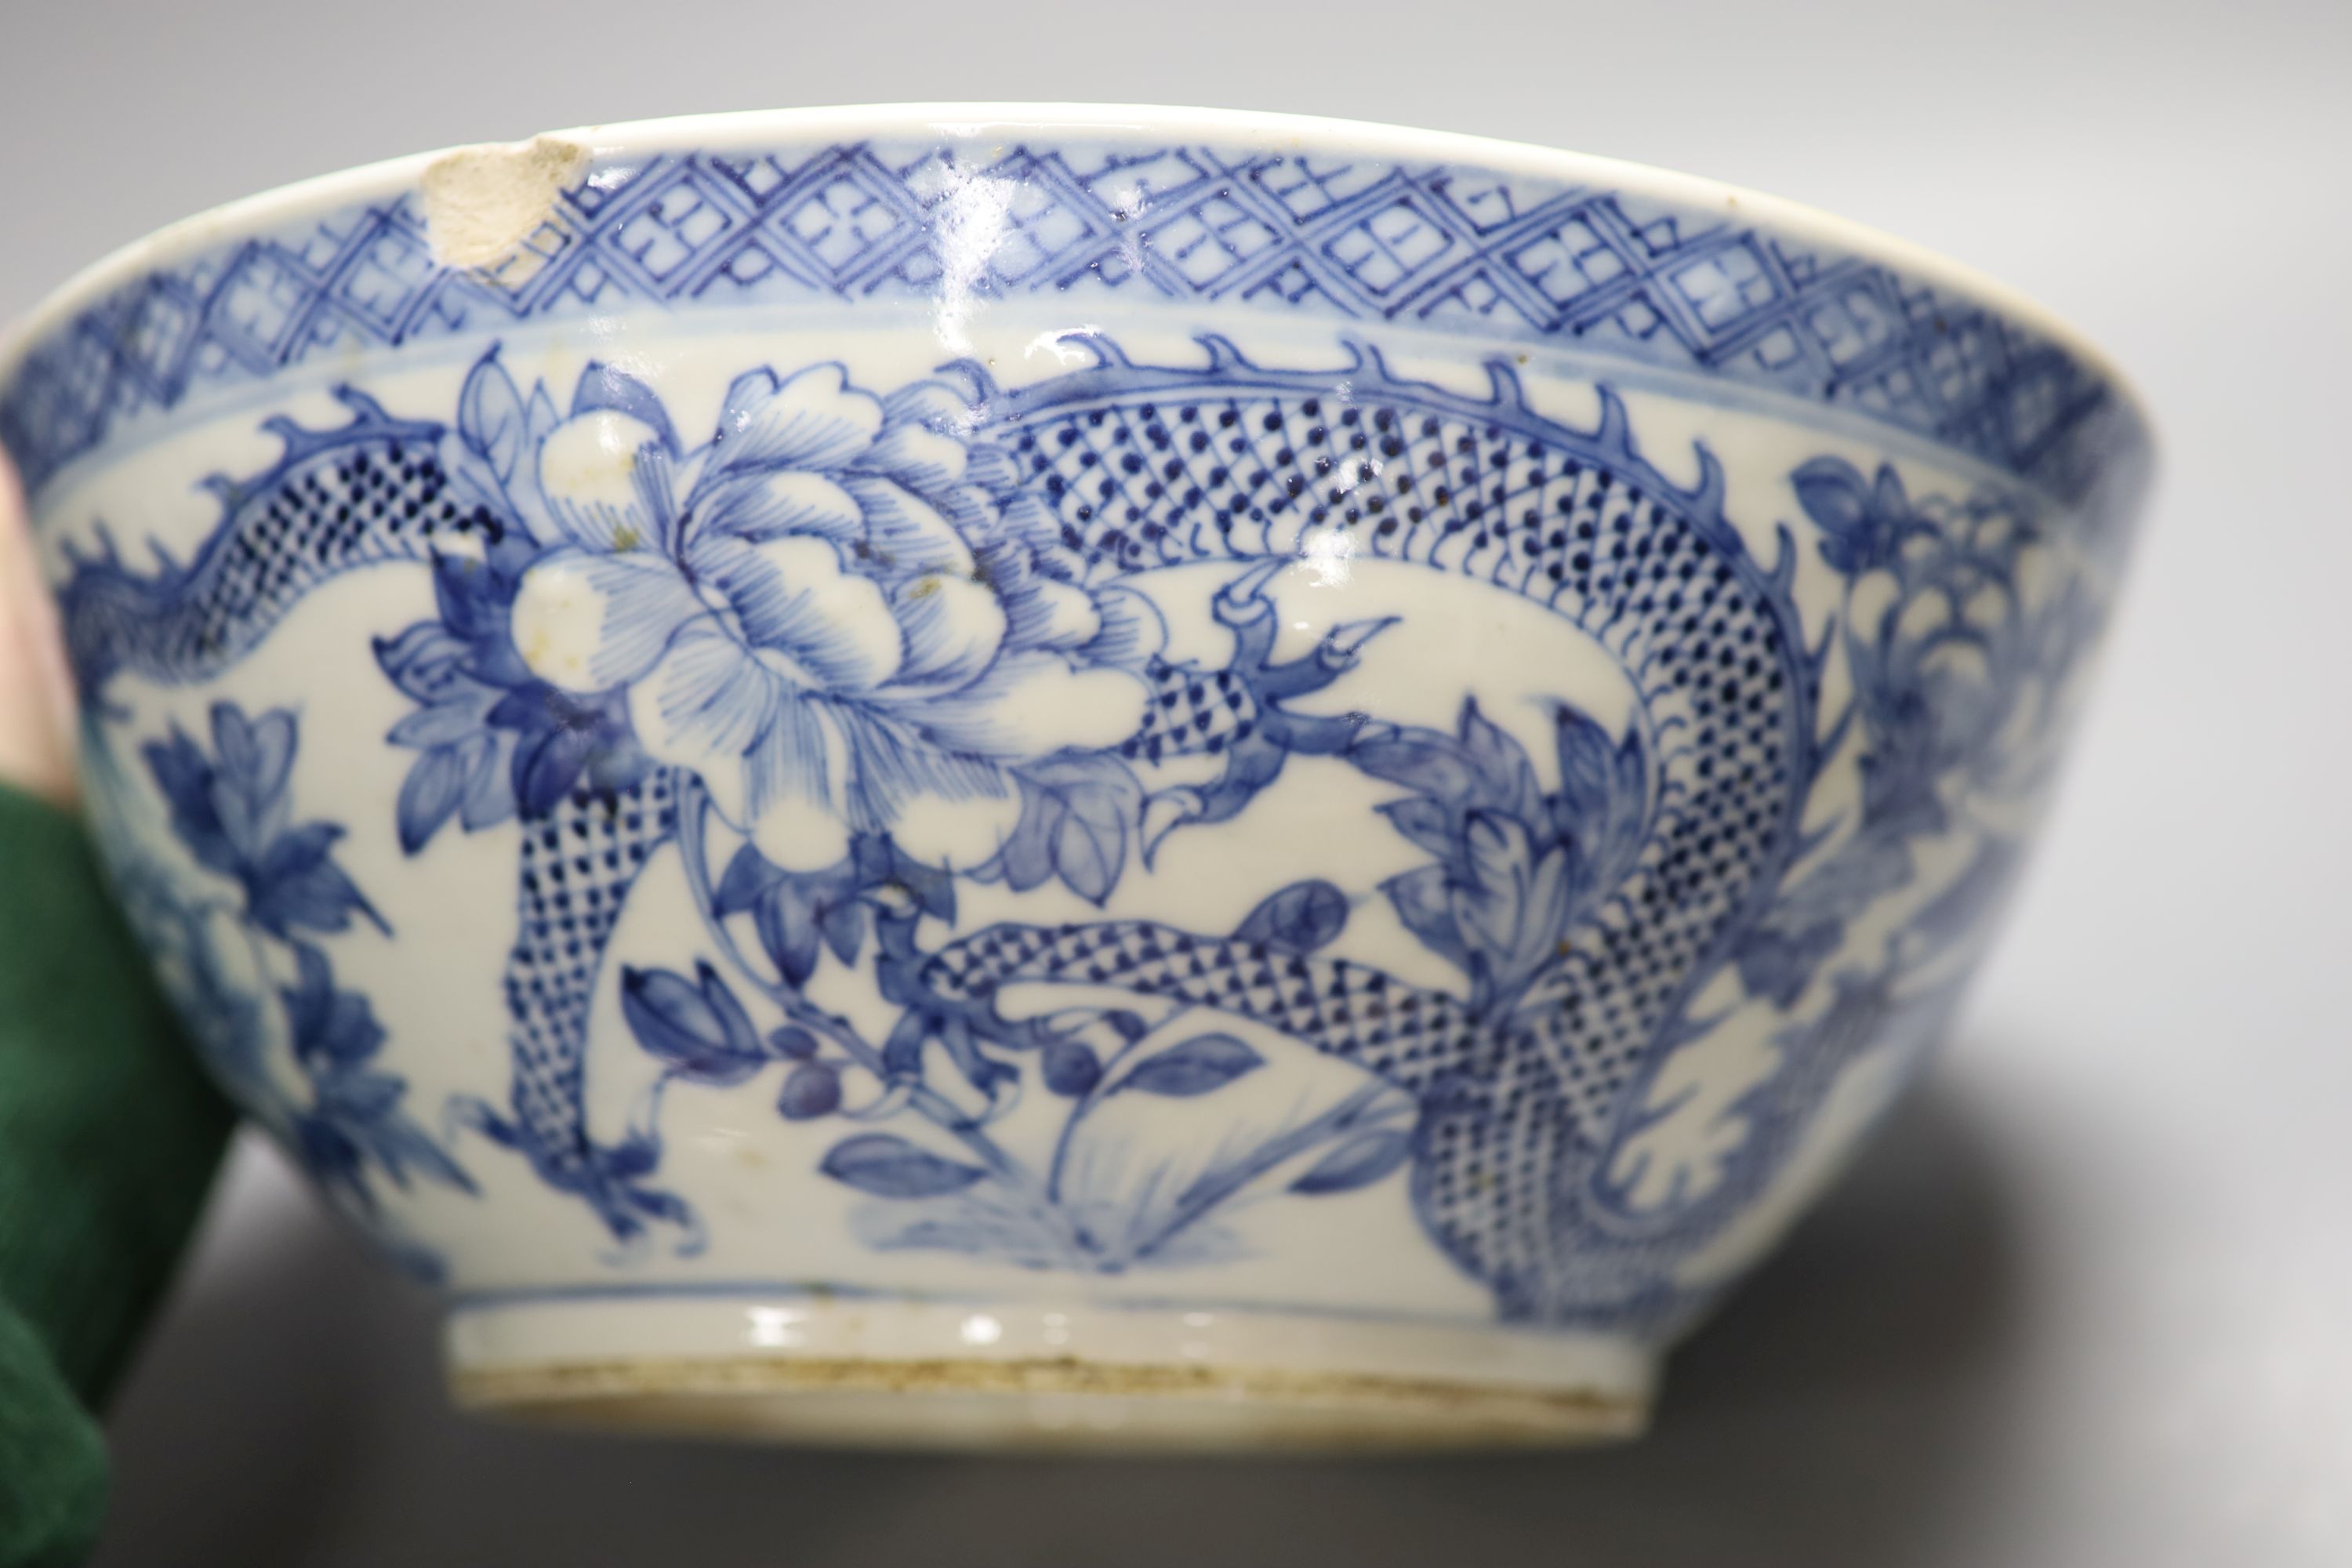 A 19th century Chinese porcelain blue and white dragon bowl, diameter 30cm